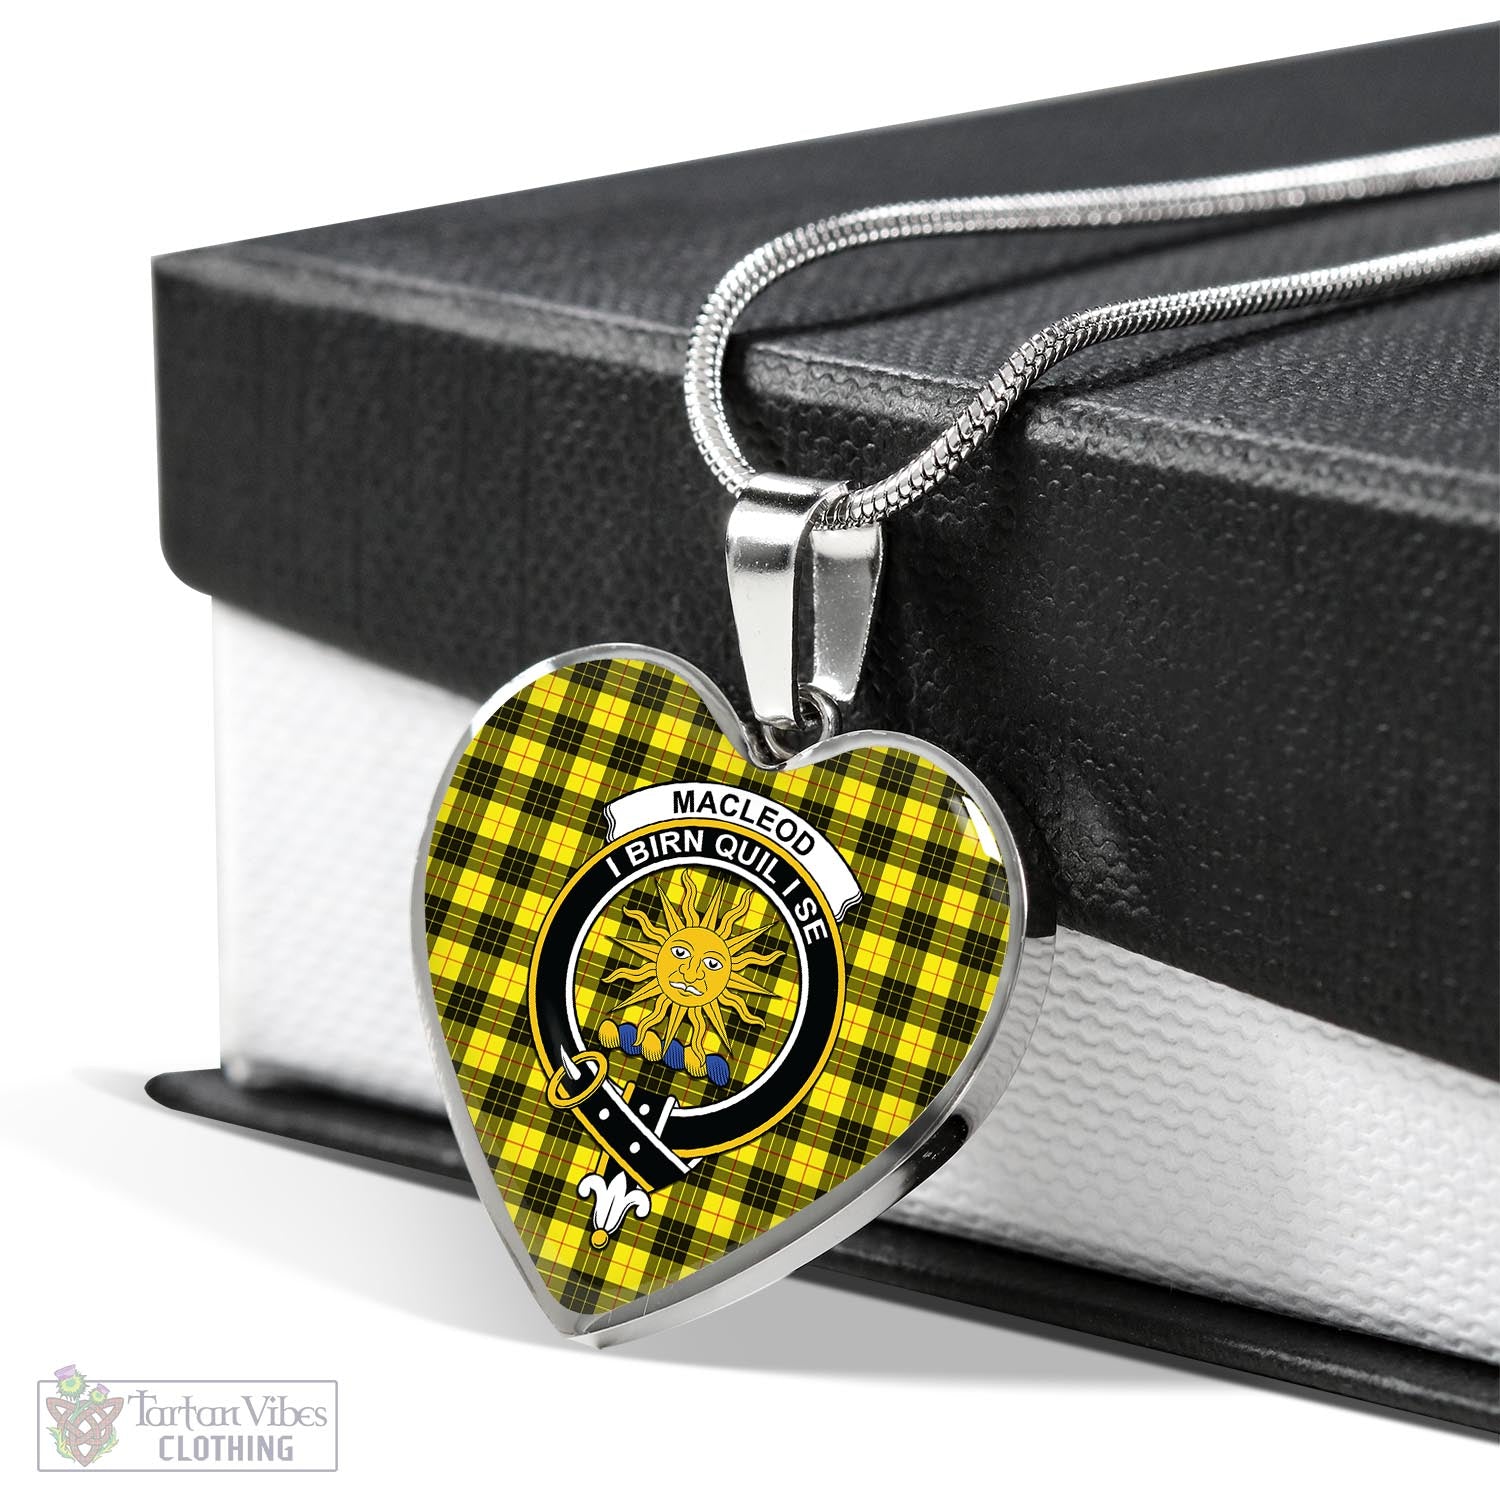 Tartan Vibes Clothing MacLeod of Lewis Modern Tartan Heart Necklace with Family Crest